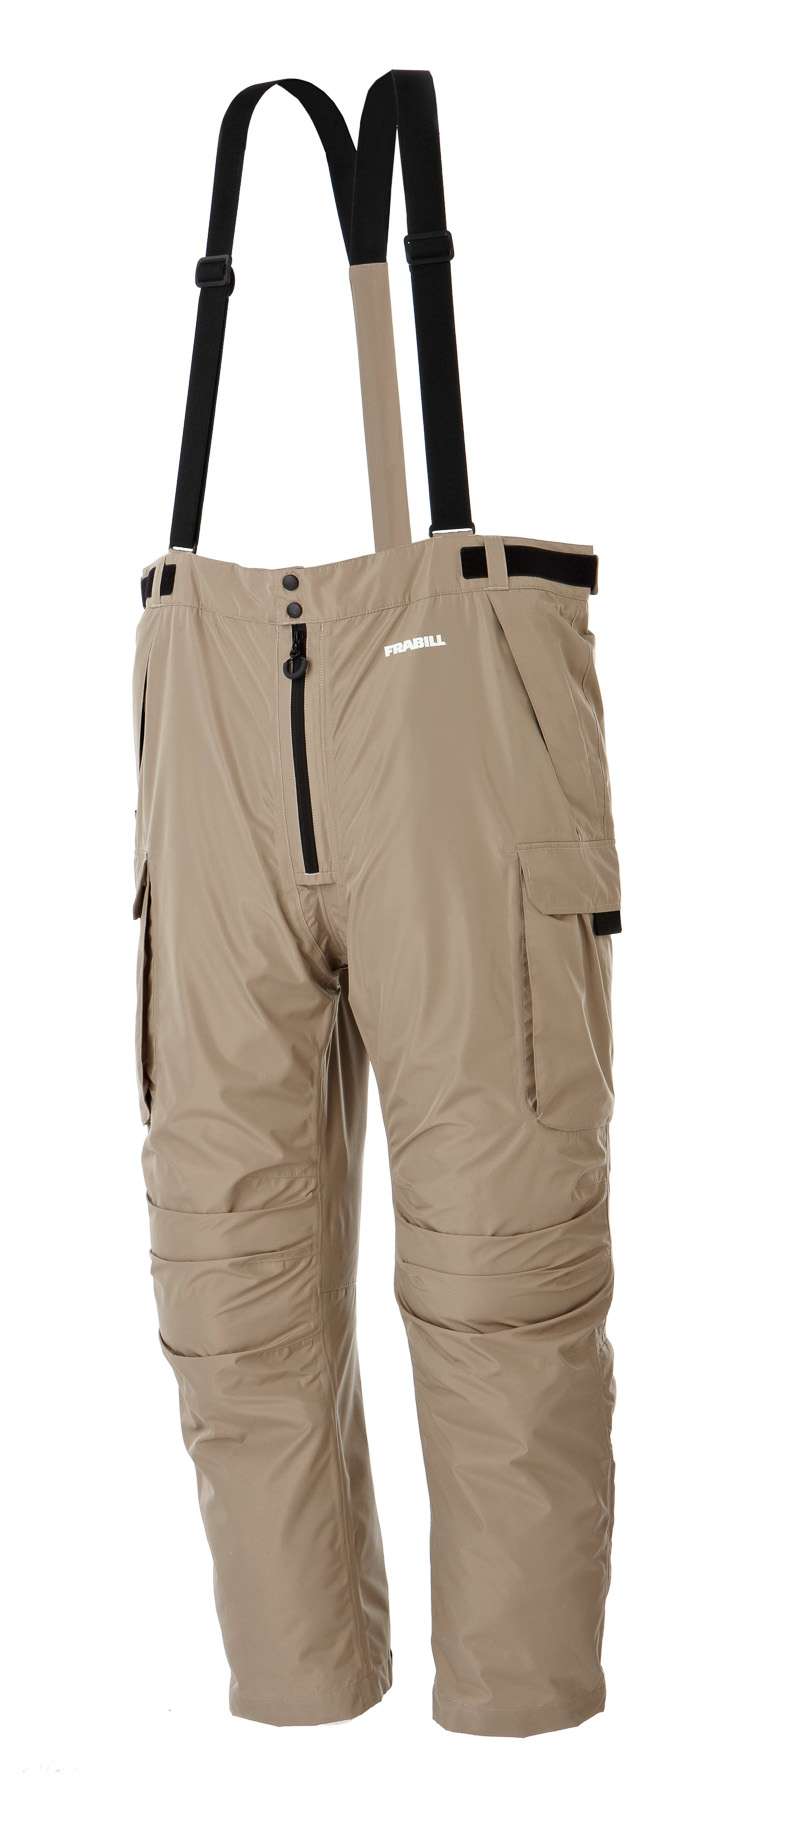 Frabill
F1 Pant
Anglers in the South can celebrate, Frabill is introducing the latest in its F-series of stormsuits, this one engineered for warm climates. It keeps the rain out while getting rid of the sweat. 